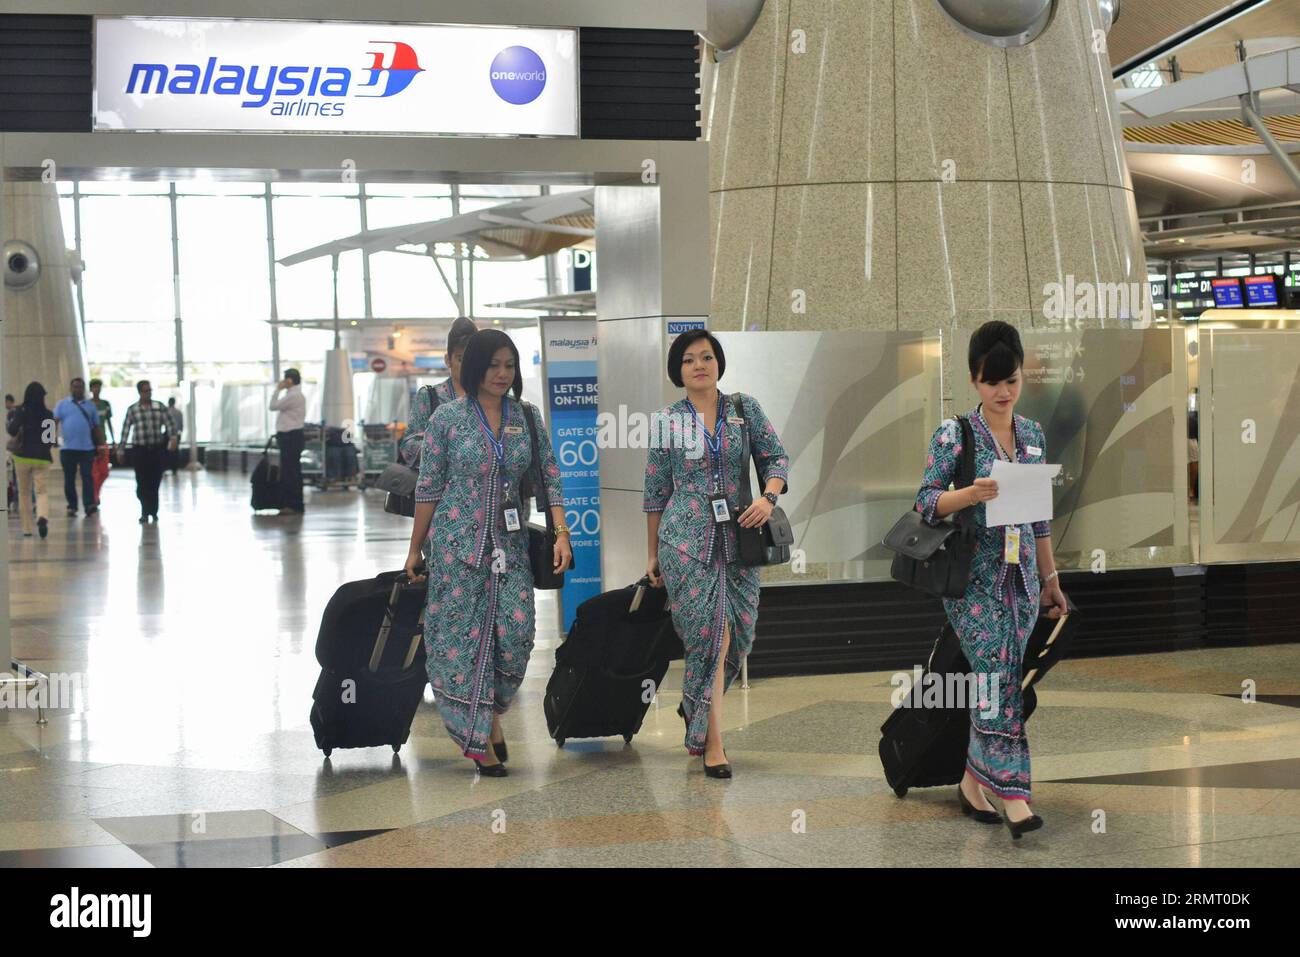 (140808) -- KUALA LUMPUR, Aug. 8, 2014 -- Flight attendants of Malaysia Airlines walk past the Malaysia Airlines counter at the Kuala Lumpur International Airport in Kuala Lumpur, Malaysia, Aug. 8, 2014. Khazanah Nasional Bhd, Malaysia Airlines (MAS) largest shareholder, said on Friday that it sought to delist the national carrier to facilitate its plan to undertake a comprehensive review and restructuring of MAS. ) MALAYSIA-MAS-KHAZANAH NASIONAL BHD-DELIST ChongxVoonxChung PUBLICATIONxNOTxINxCHN   140808 Kuala Lumpur Aug 8 2014 Flight Attendants of Malaysia Airlines Walk Past The Malaysia Air Stock Photo